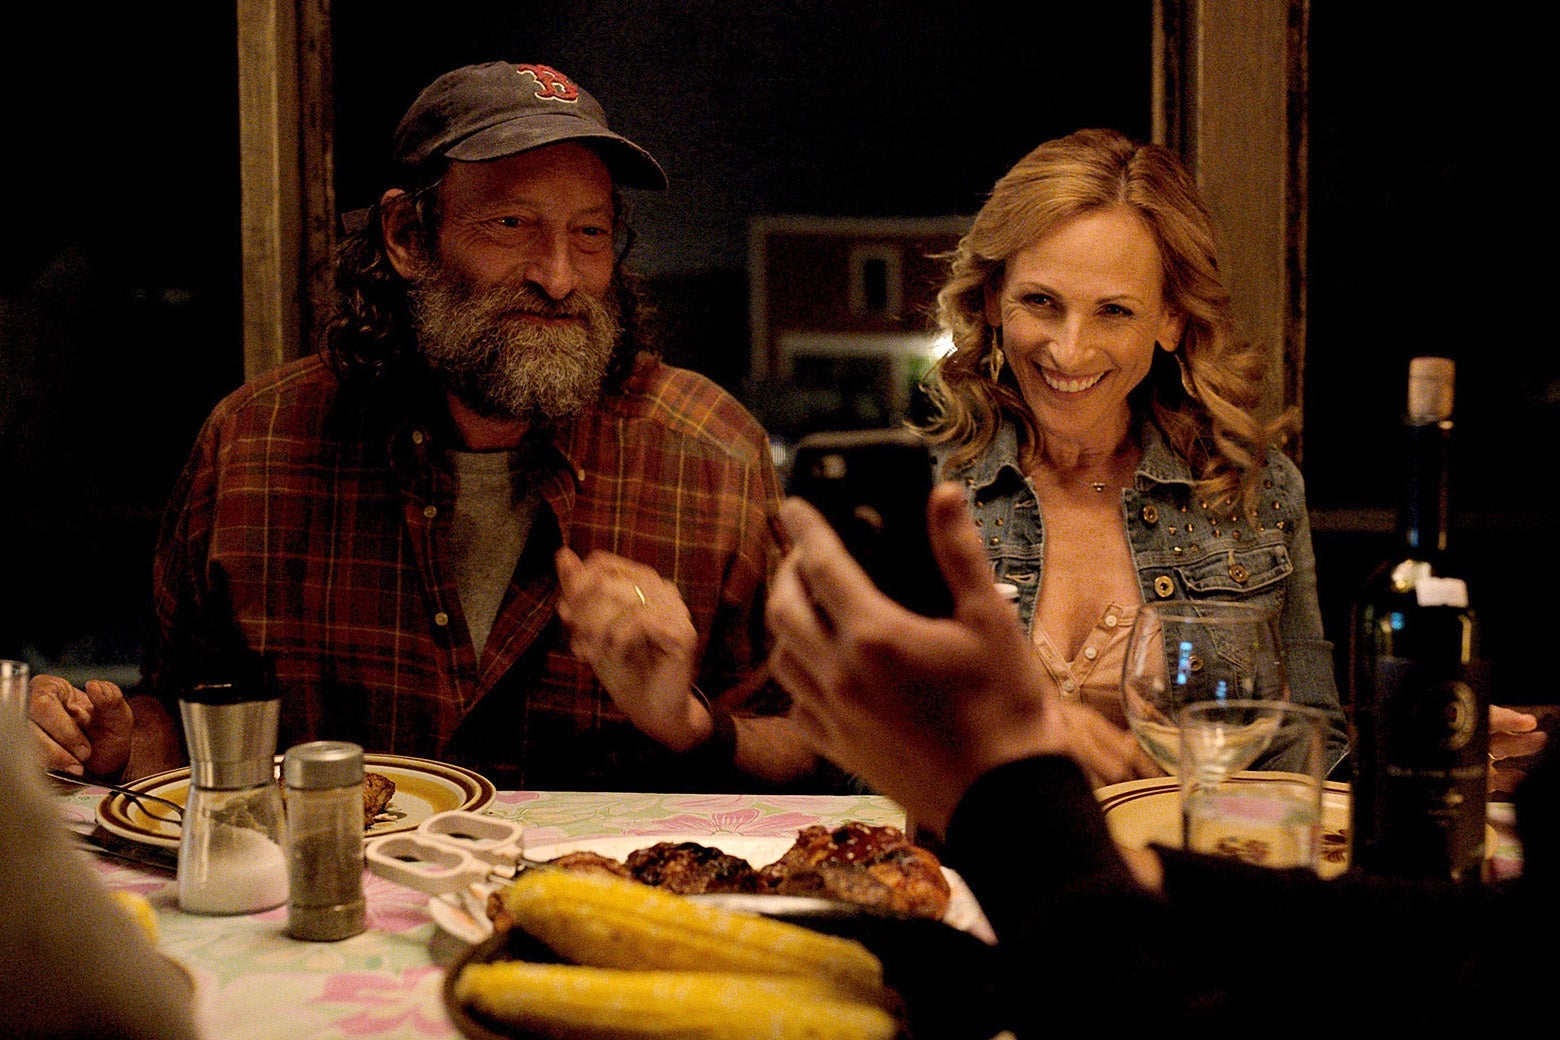 Troy Kotsur and Marlee Matlin, as Frank and Jackie Rossi, smile across a dinner table at a smartphone held by an unseen figure's hand. Frank has a bushy, graying beard and wears a cap with the Red Sox logo.